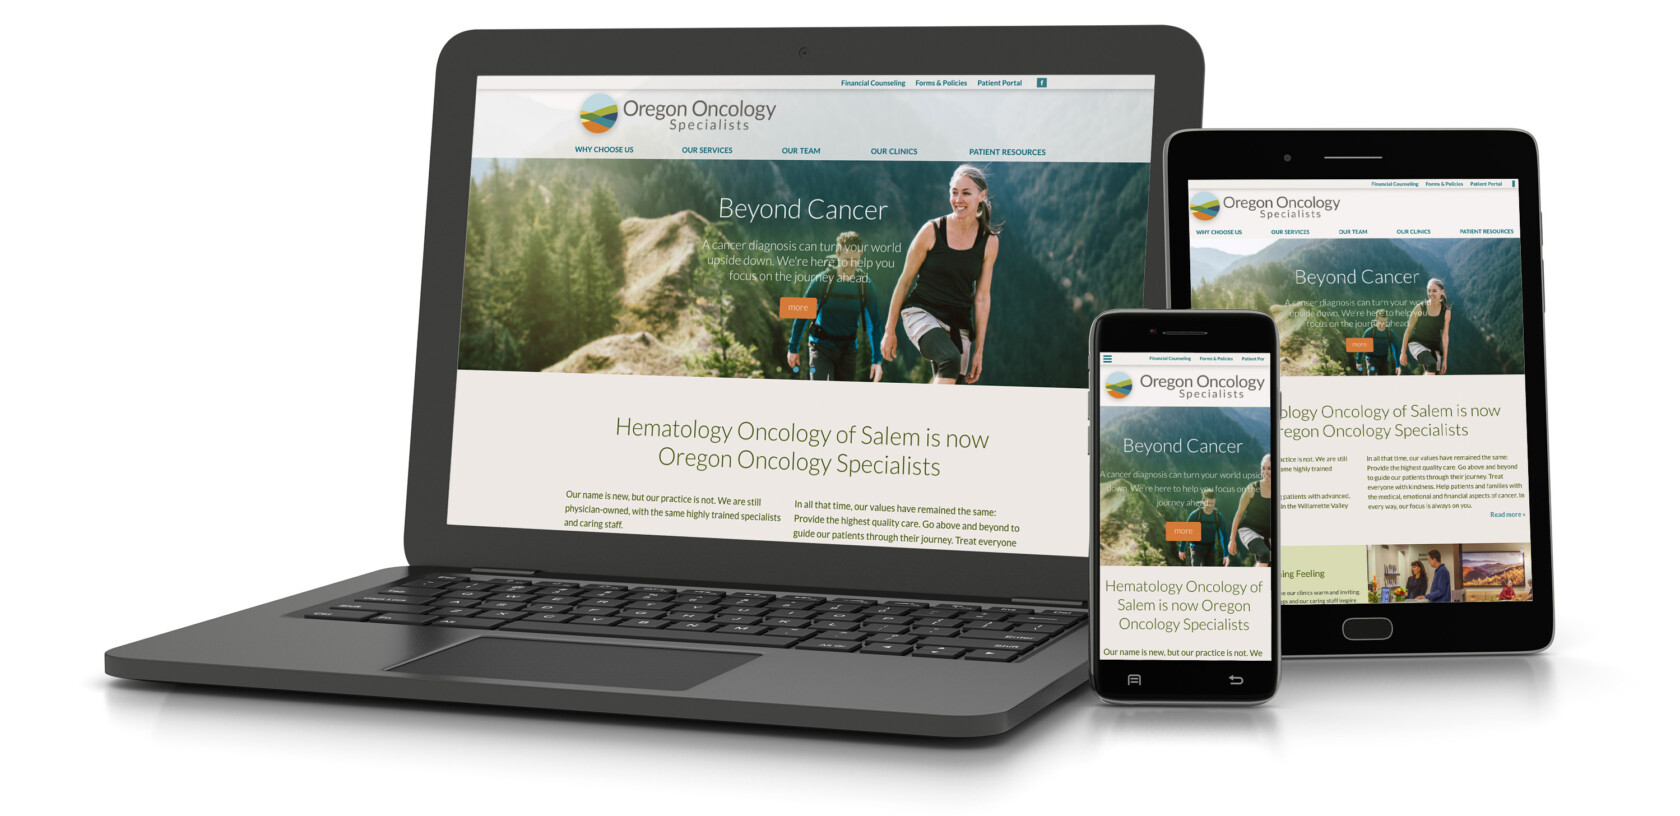 Oregon Oncology Specialists website redesigned to be responsive on multiple platforms